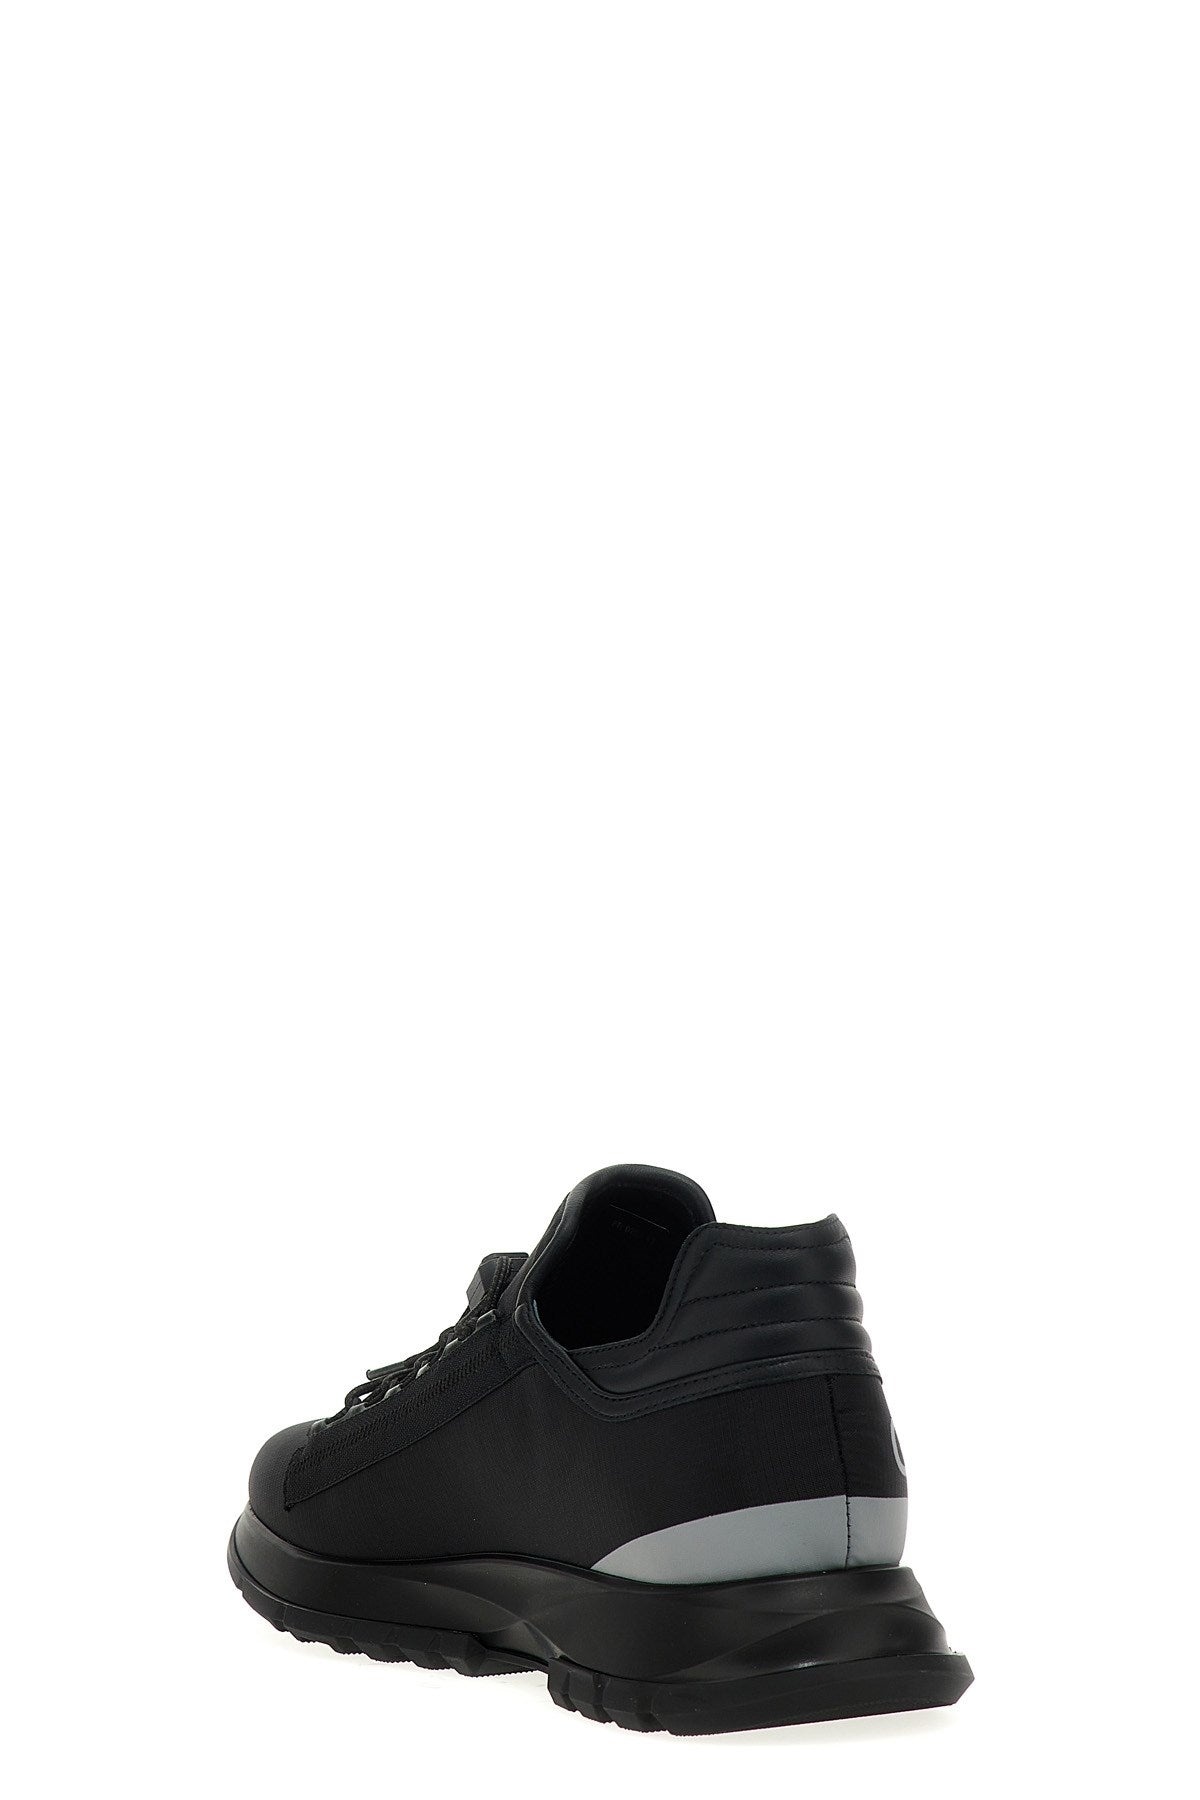 Givenchy Men 'Spectre' Sneakers - 2